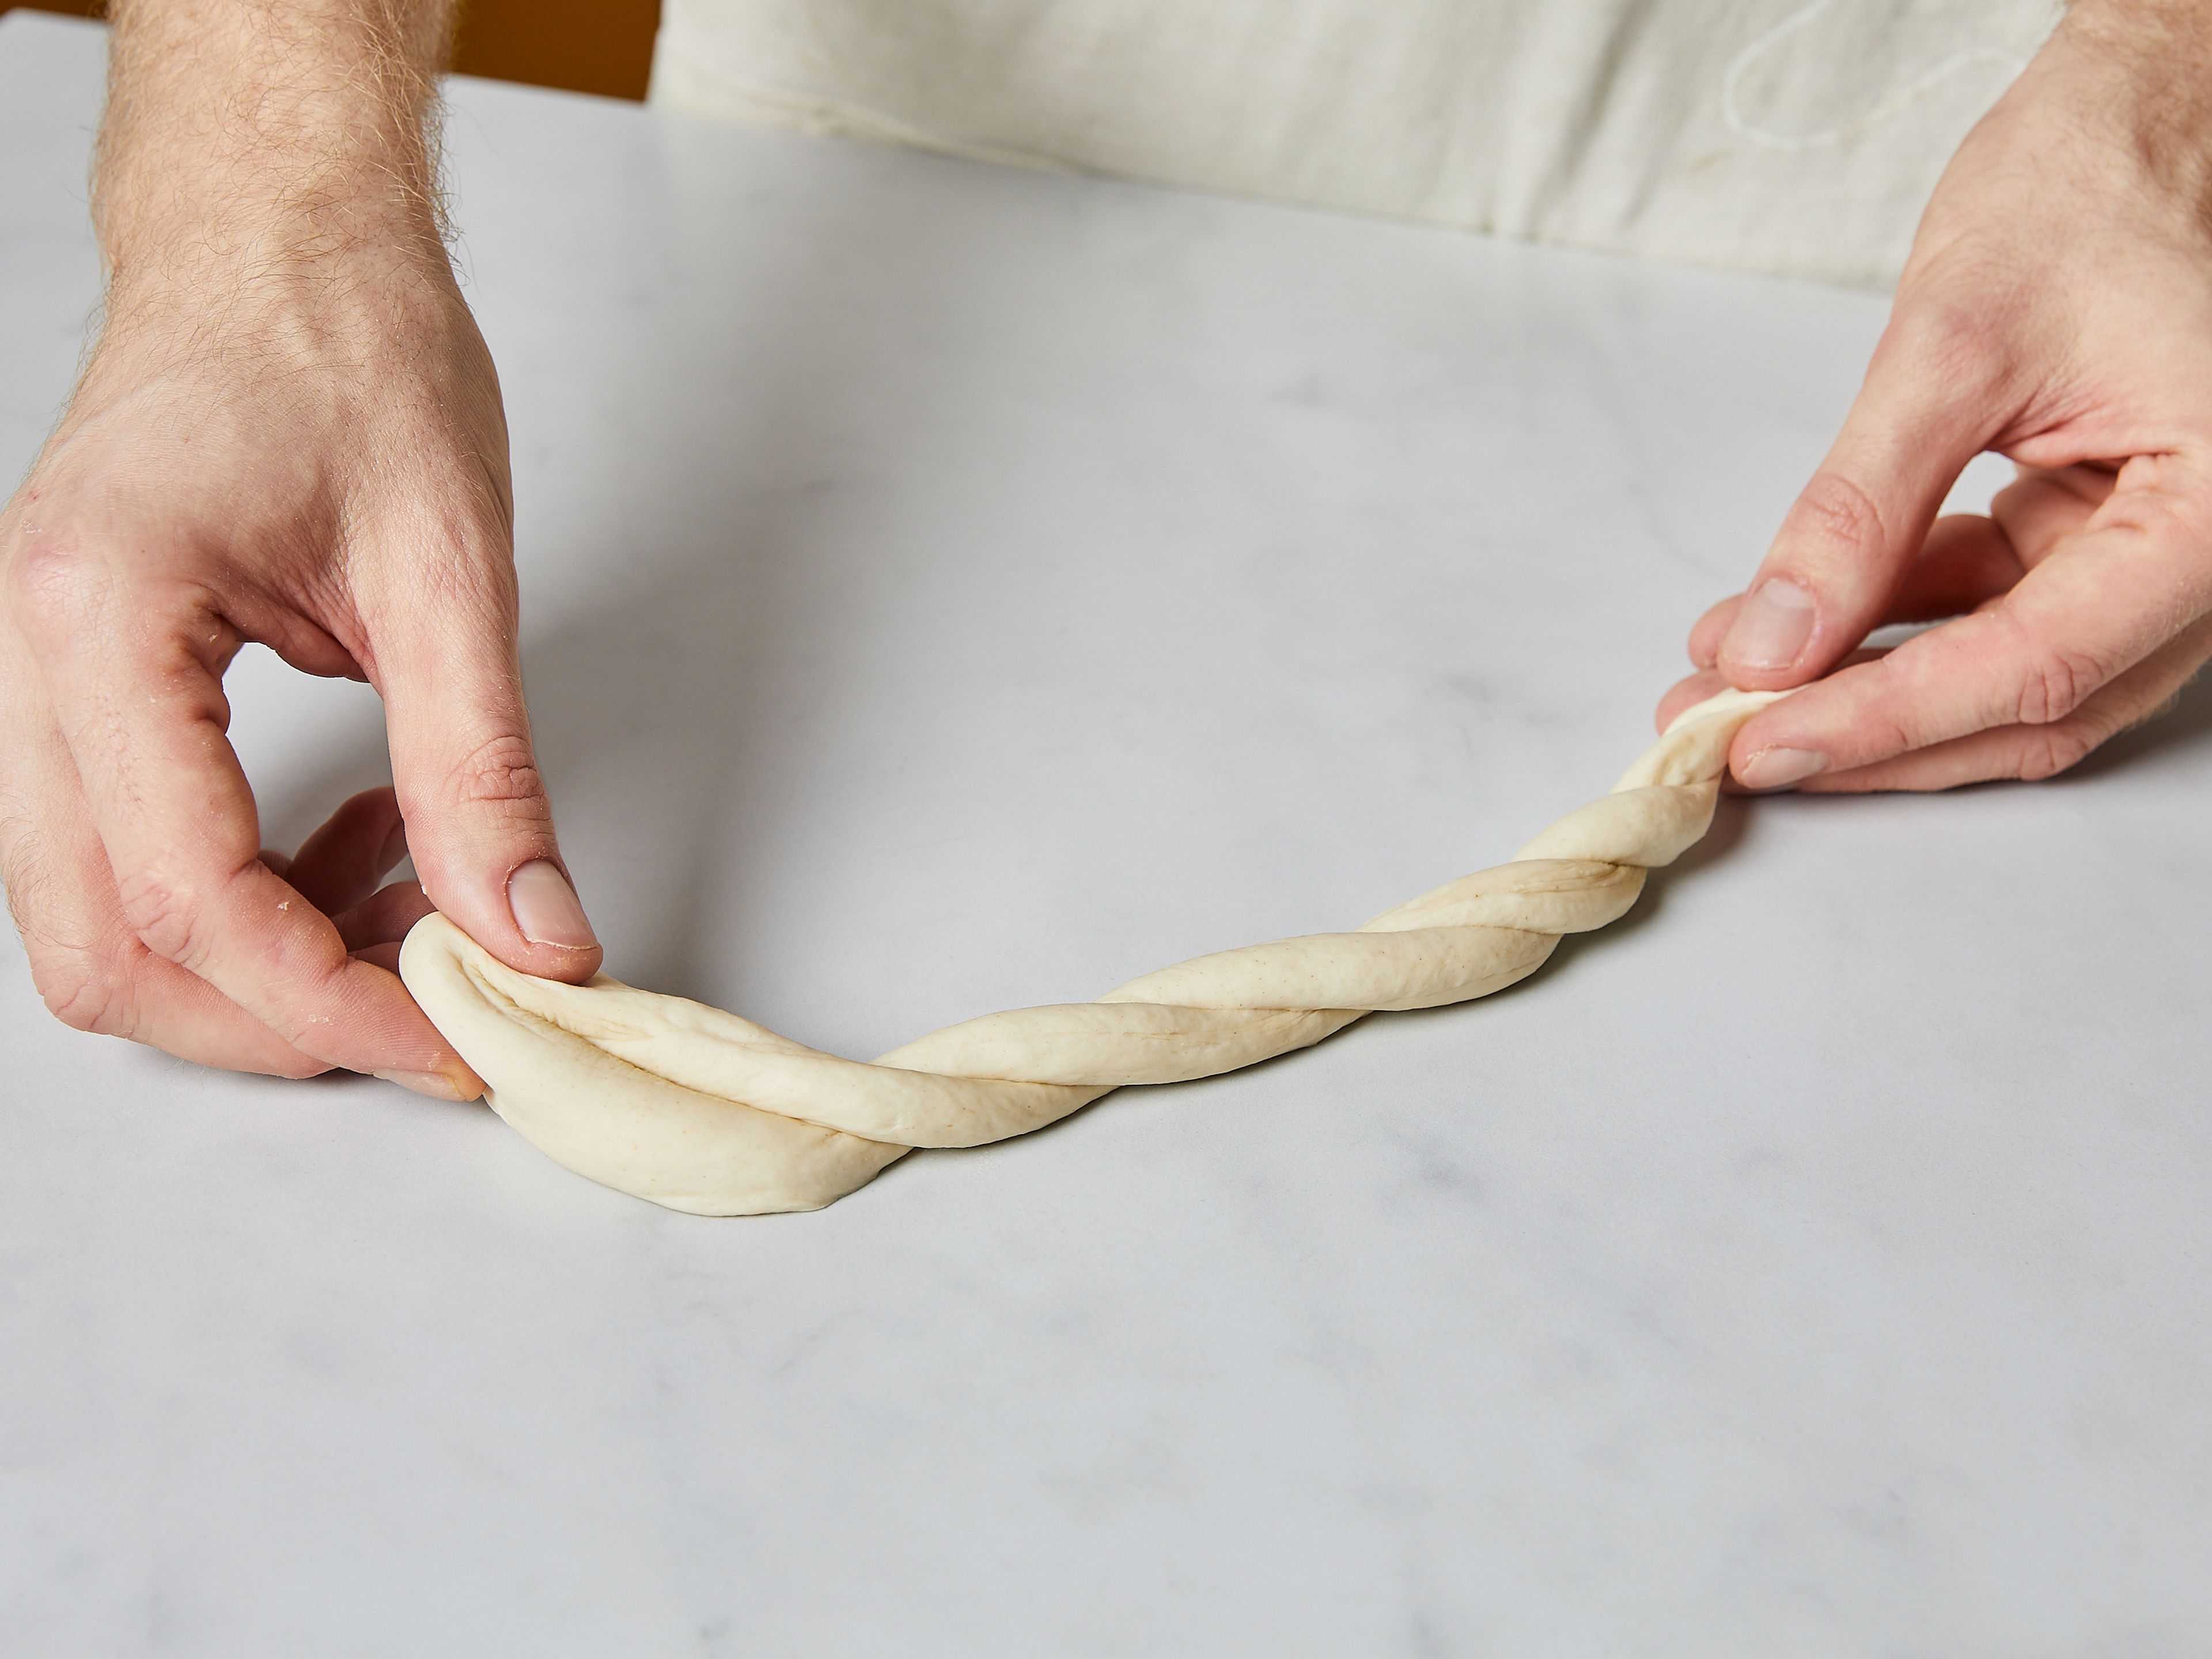 Preheat the oven to 250°C/480°F. Work with two dough balls at a time and roll each ball into a 30 cm long rope. Braid the two ropes together, and pinch the ends together to create a ring. Lightly roll out the ring with your hand, creating a 15-20 cm large diameter.